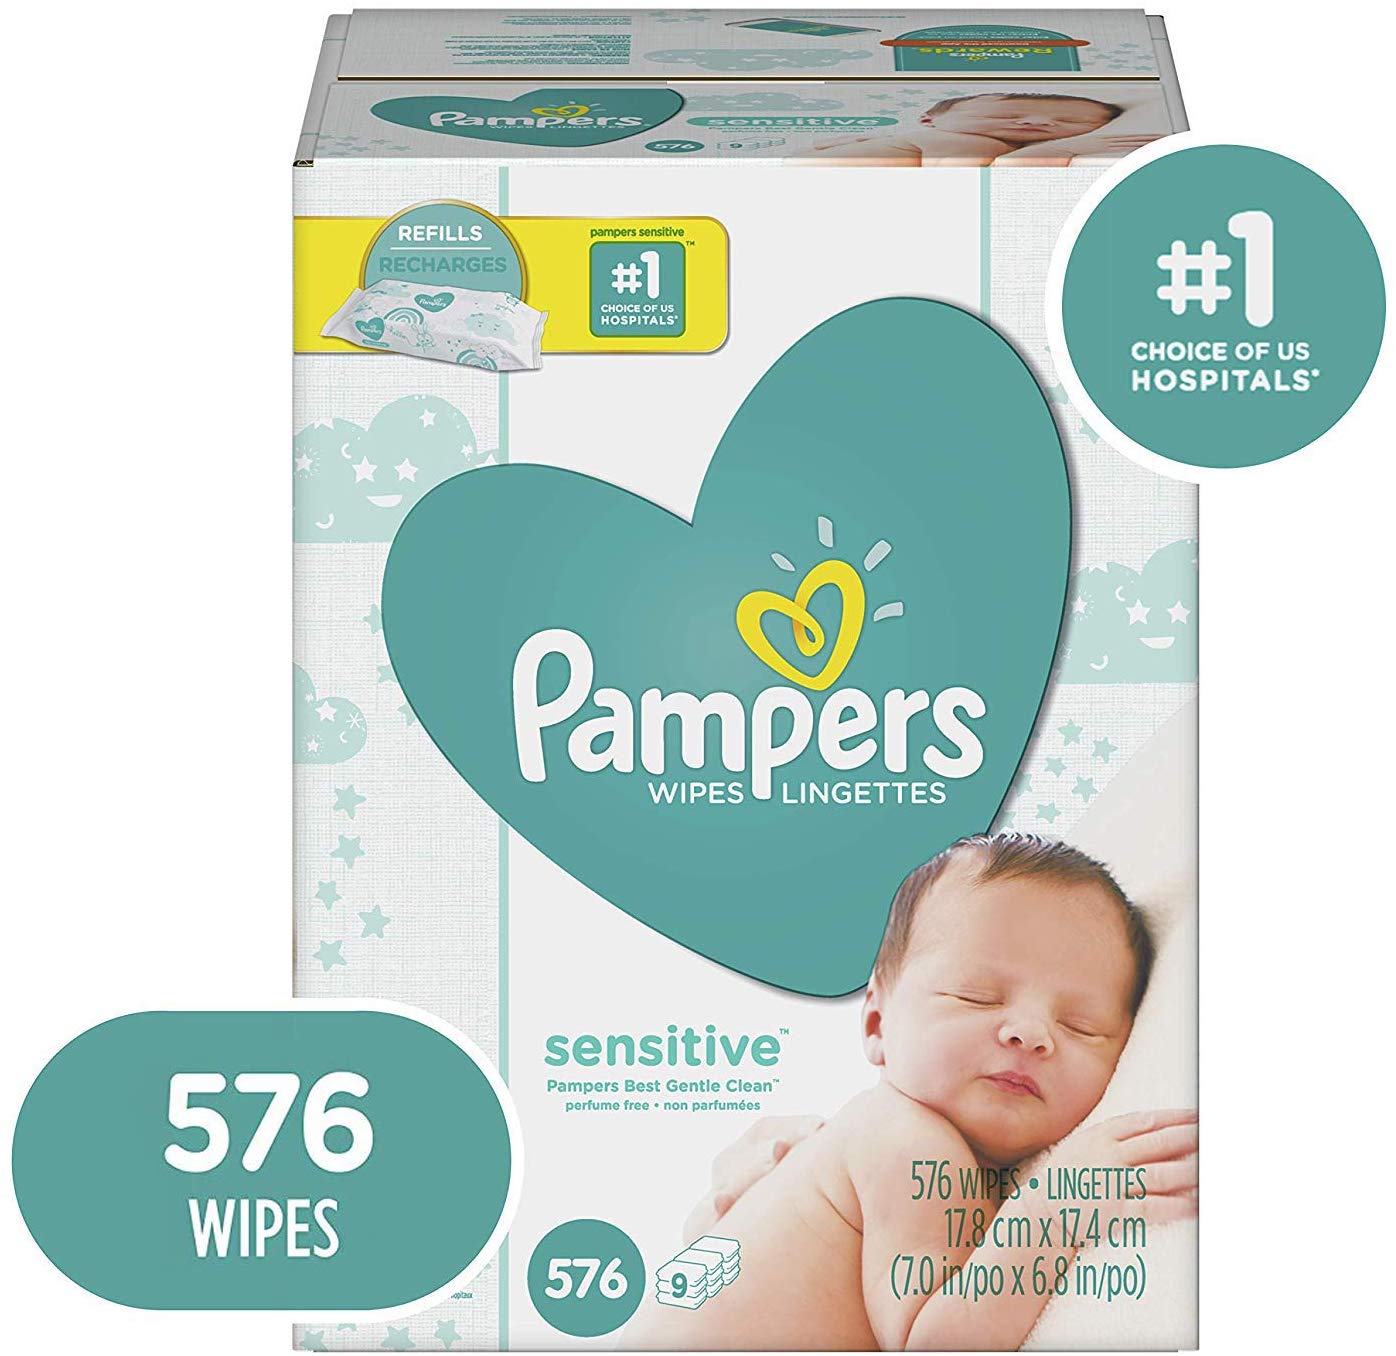 Amazon Lowest Price: Pampers Sensitive Water Baby Diaper Wipes